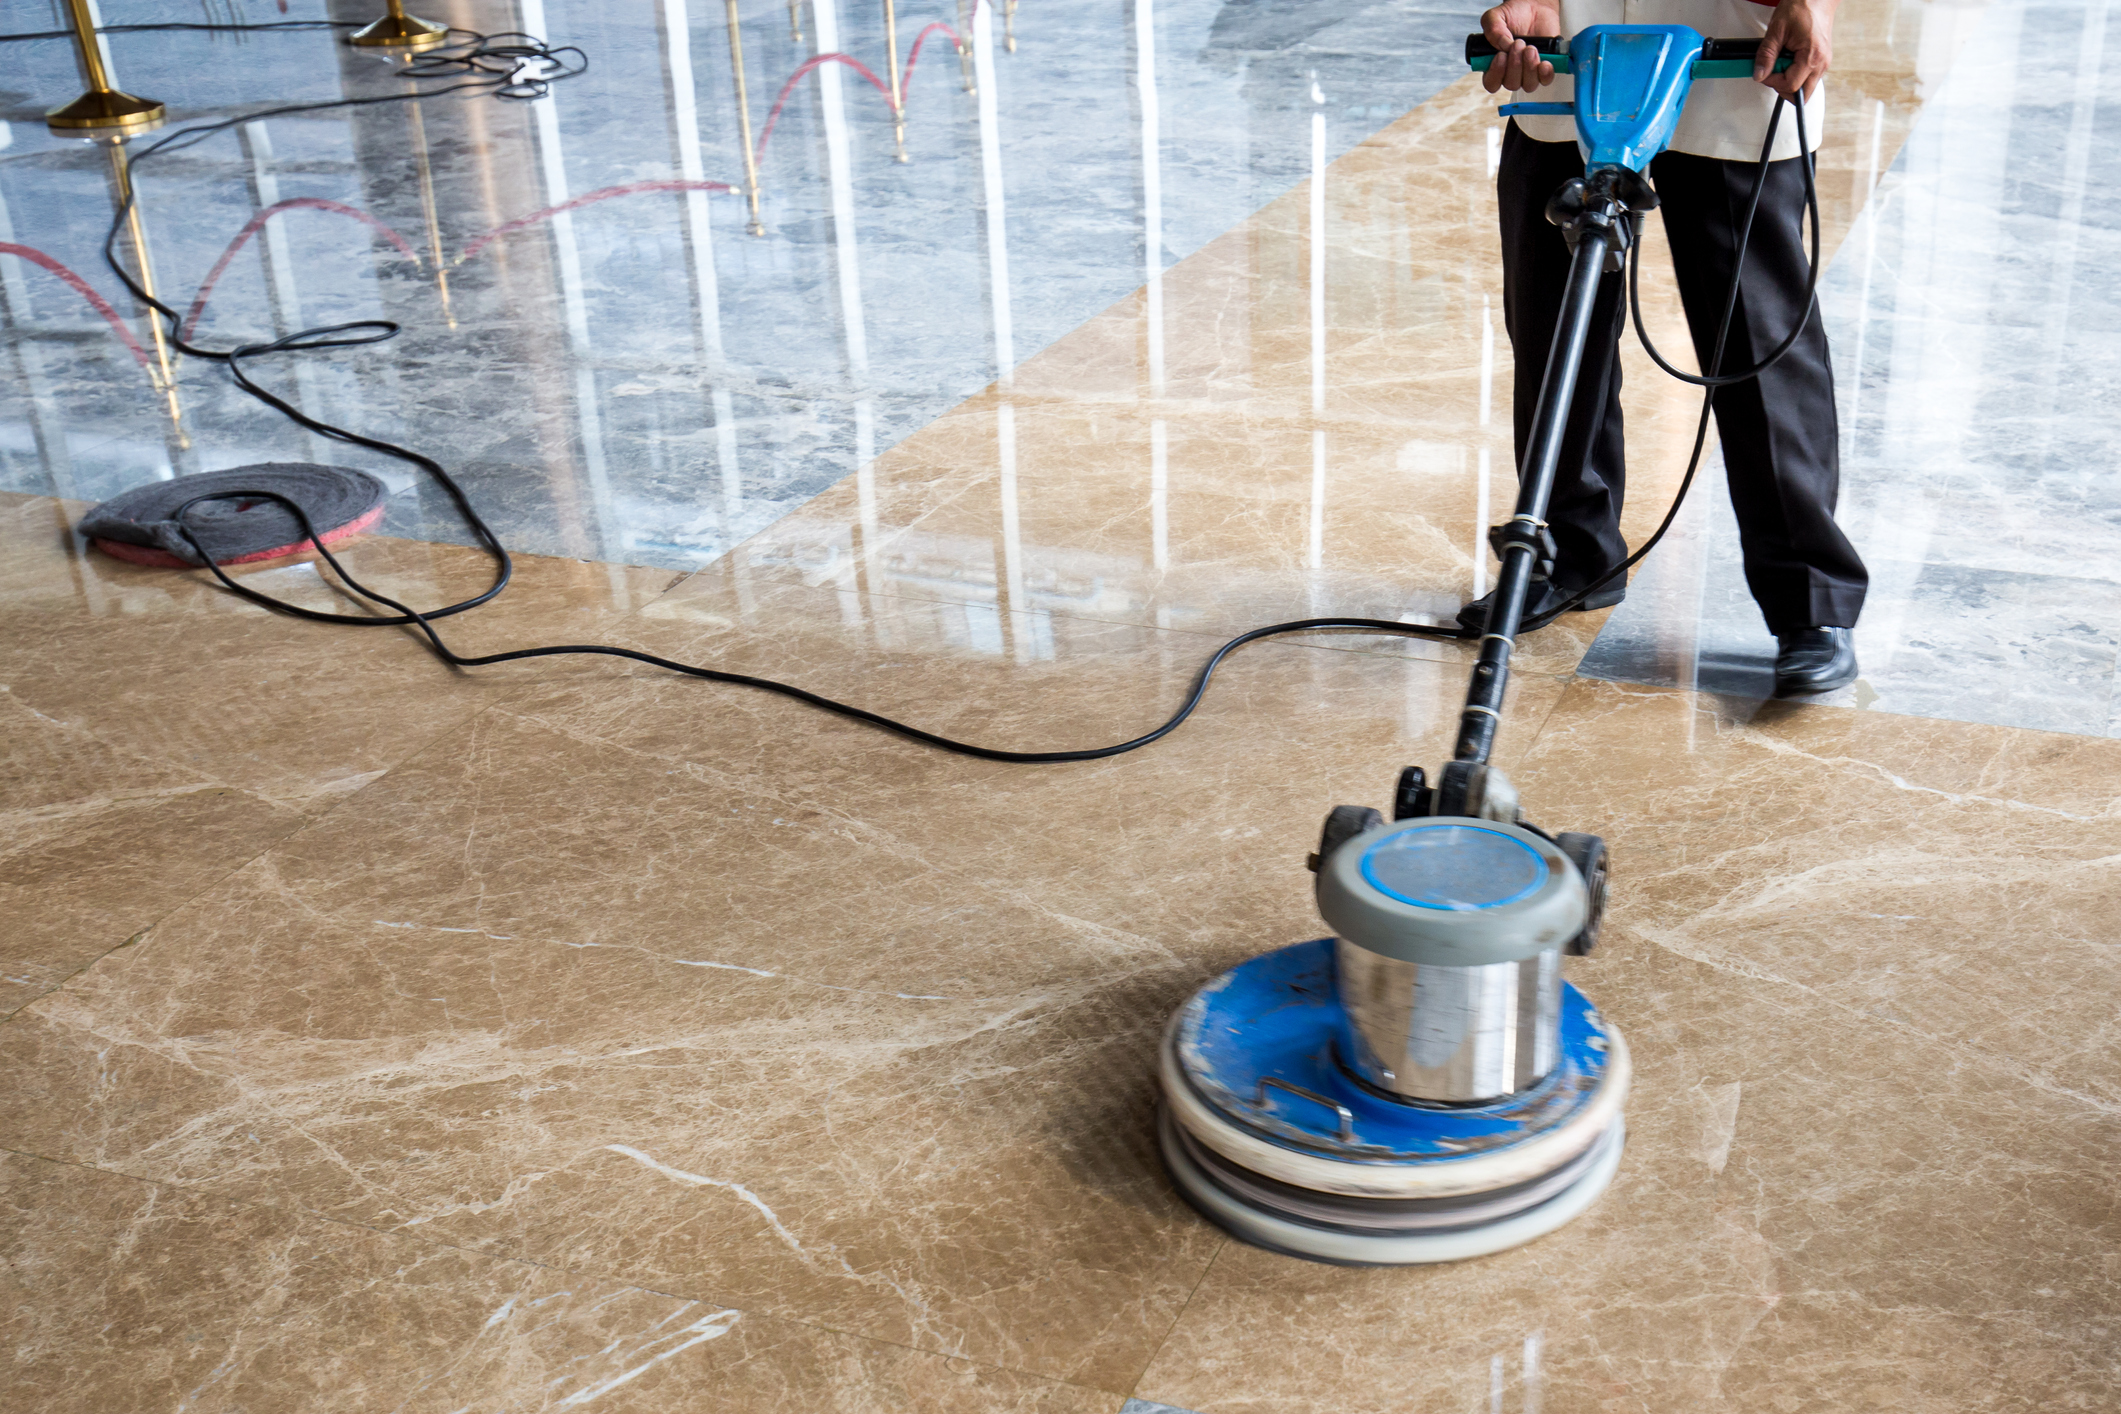 Atlantic County Commercial Cleaning Service